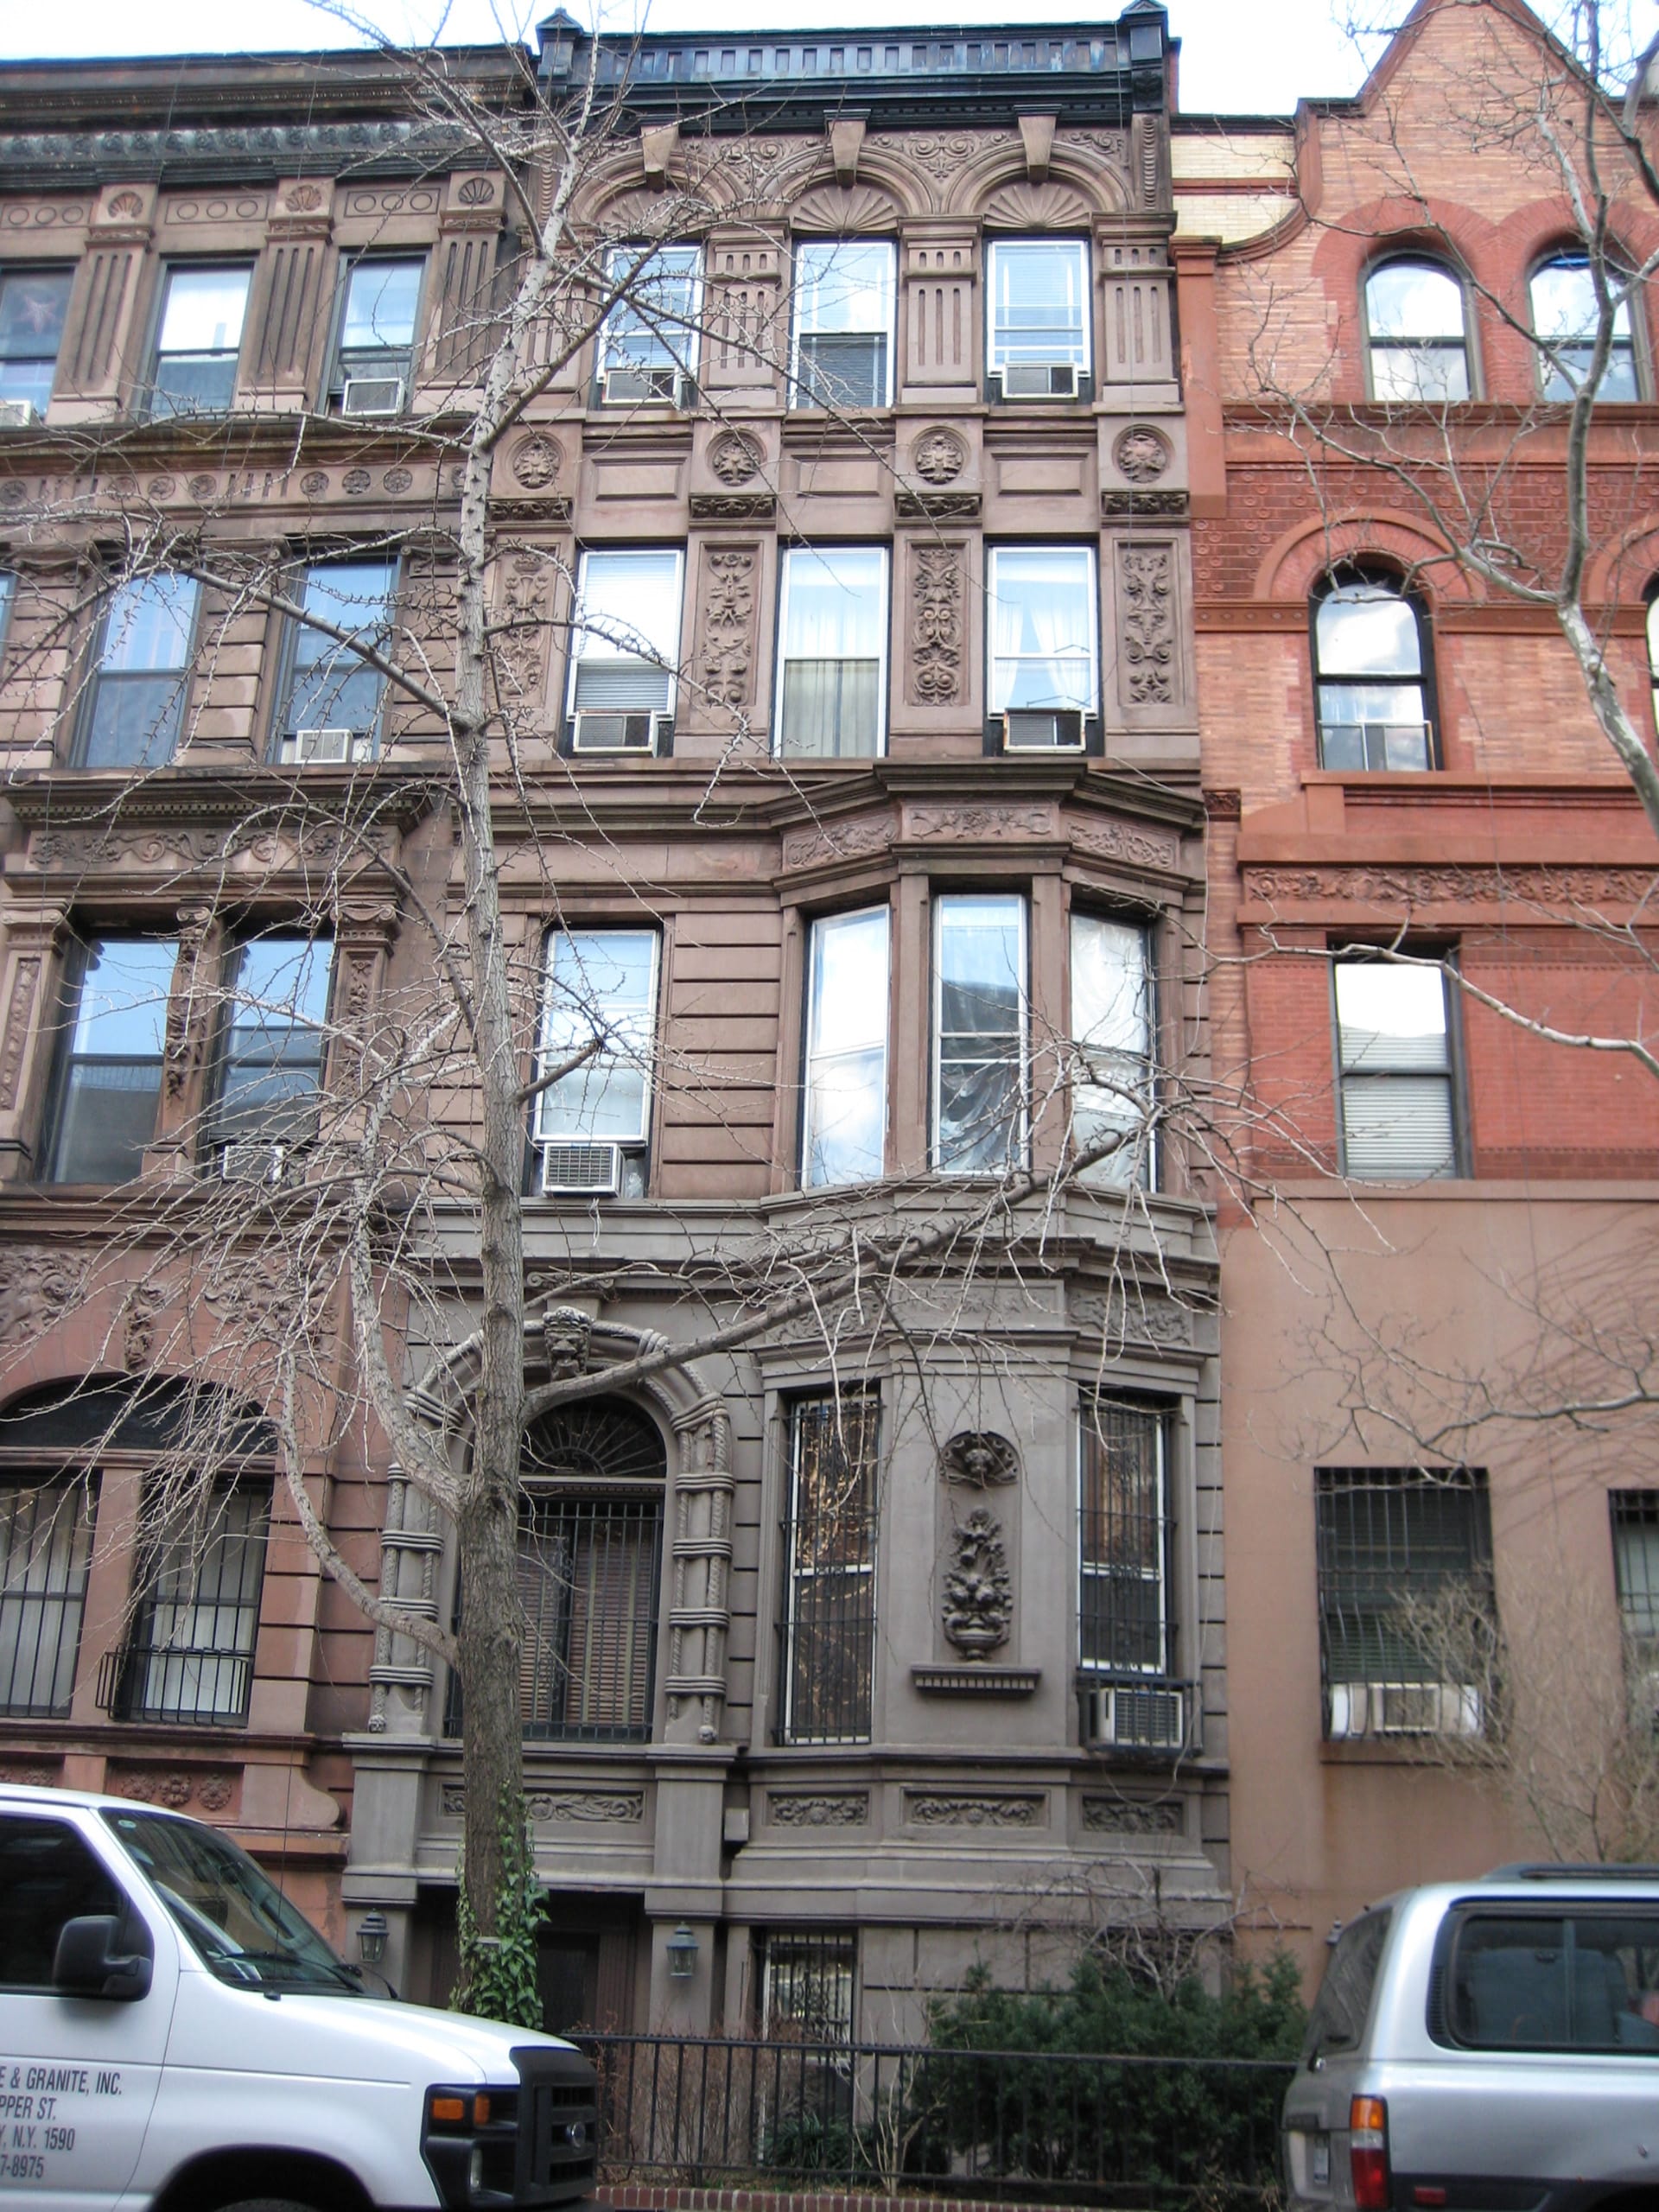 Front façade of a Greek Revival brownstone on the Upper West Side of Manhattan before our renovation